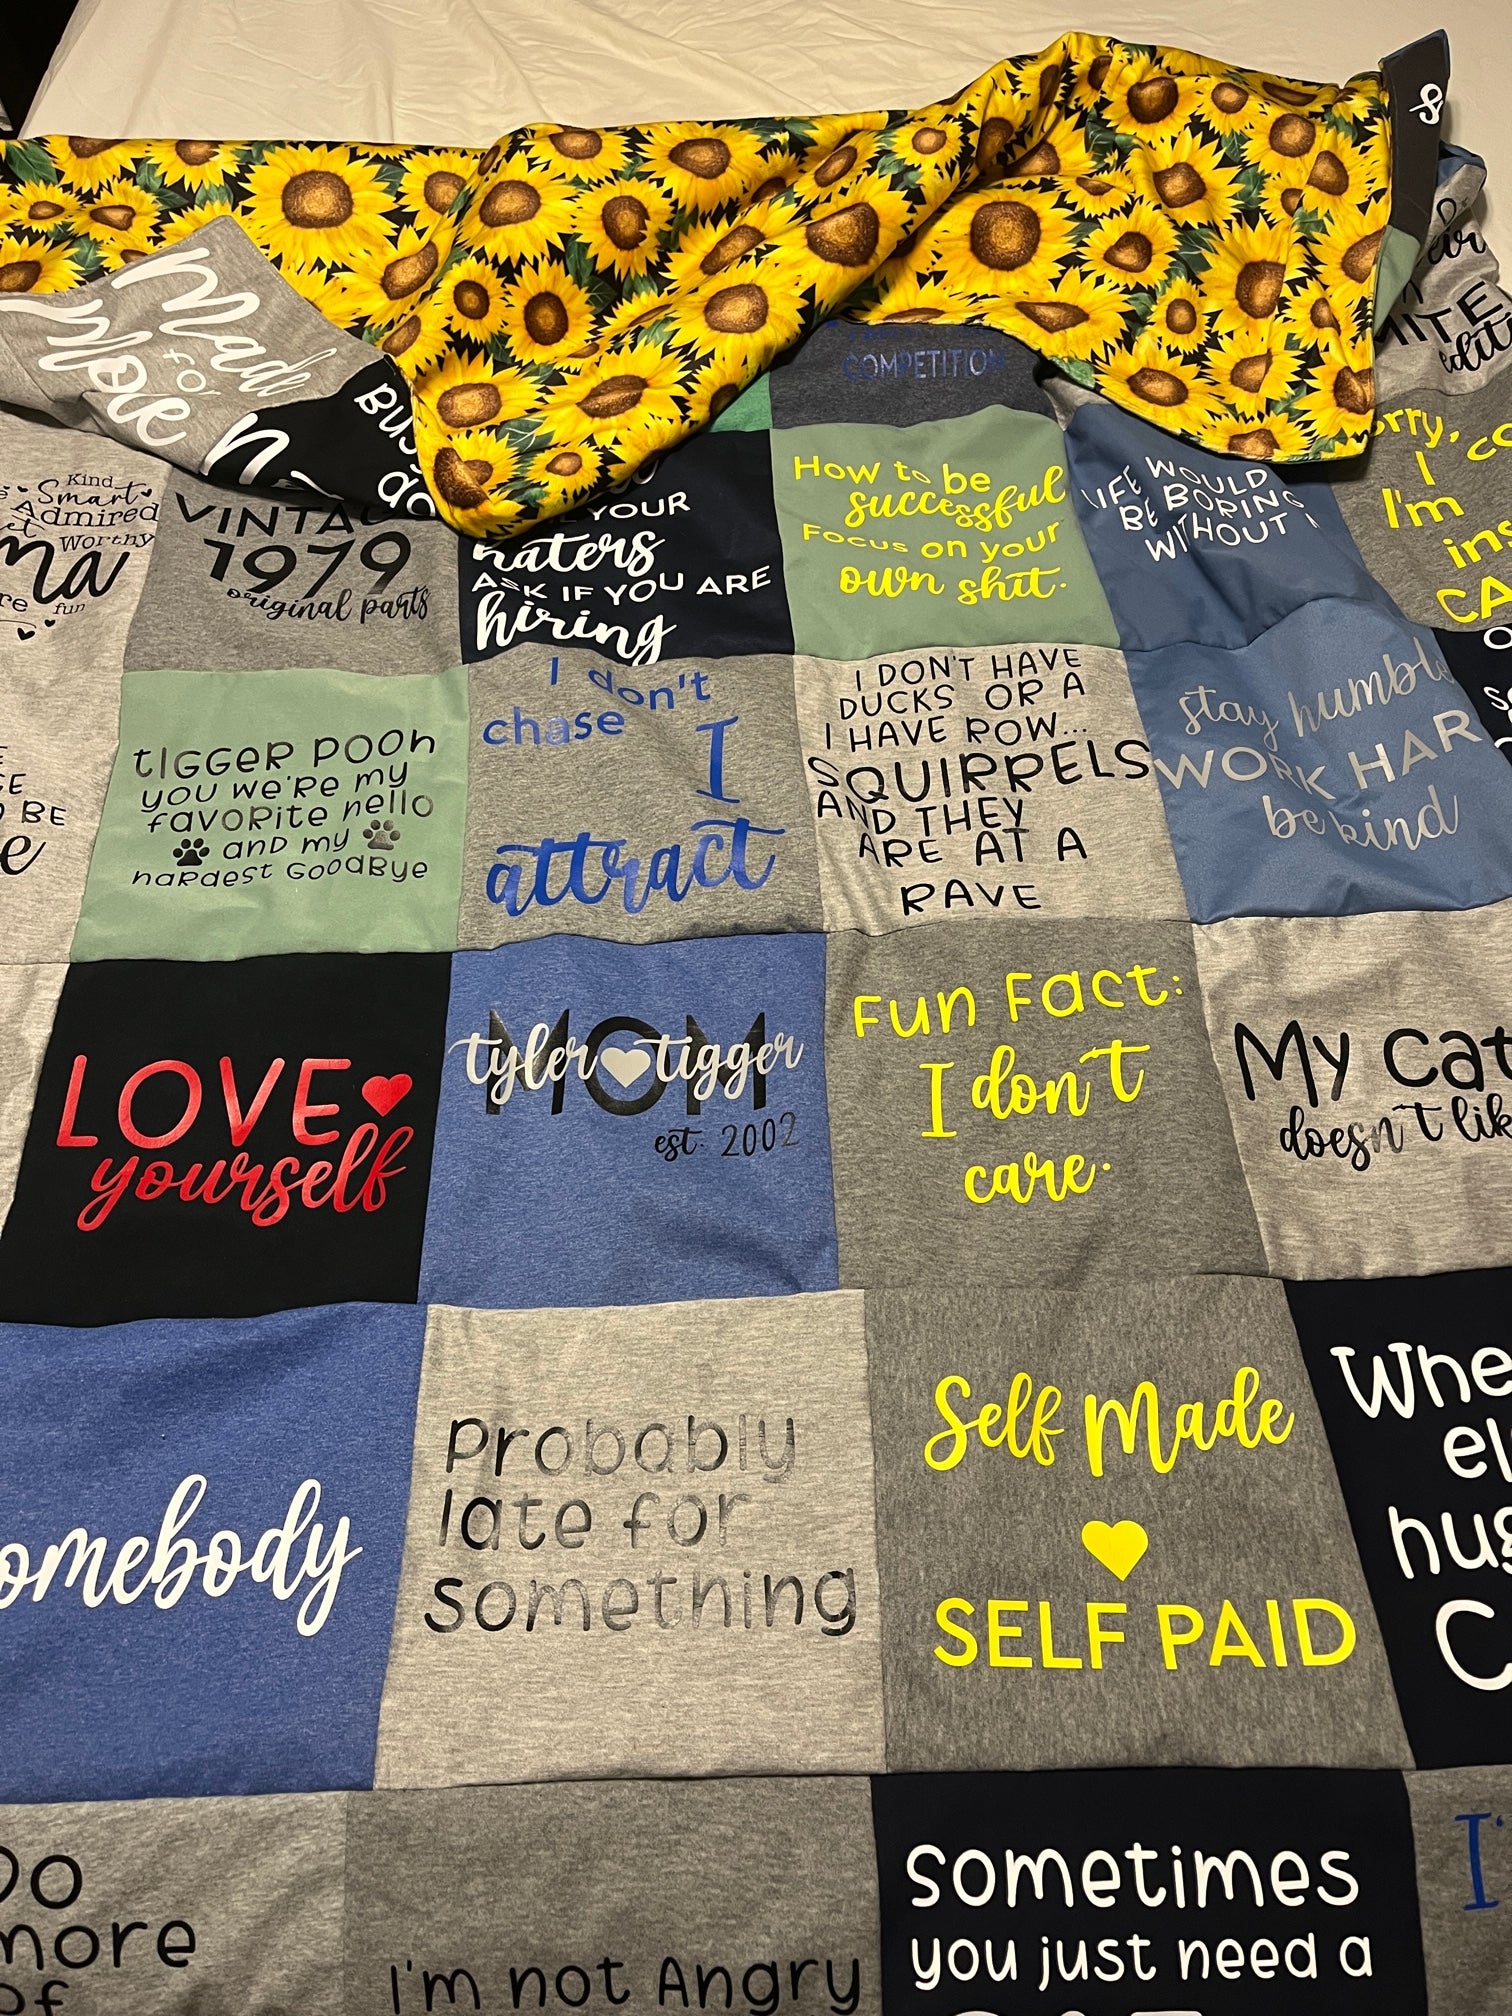 custom t shirt quilt with sunflower minky back. Sunflower minky back is extra and has limited quantities available.             